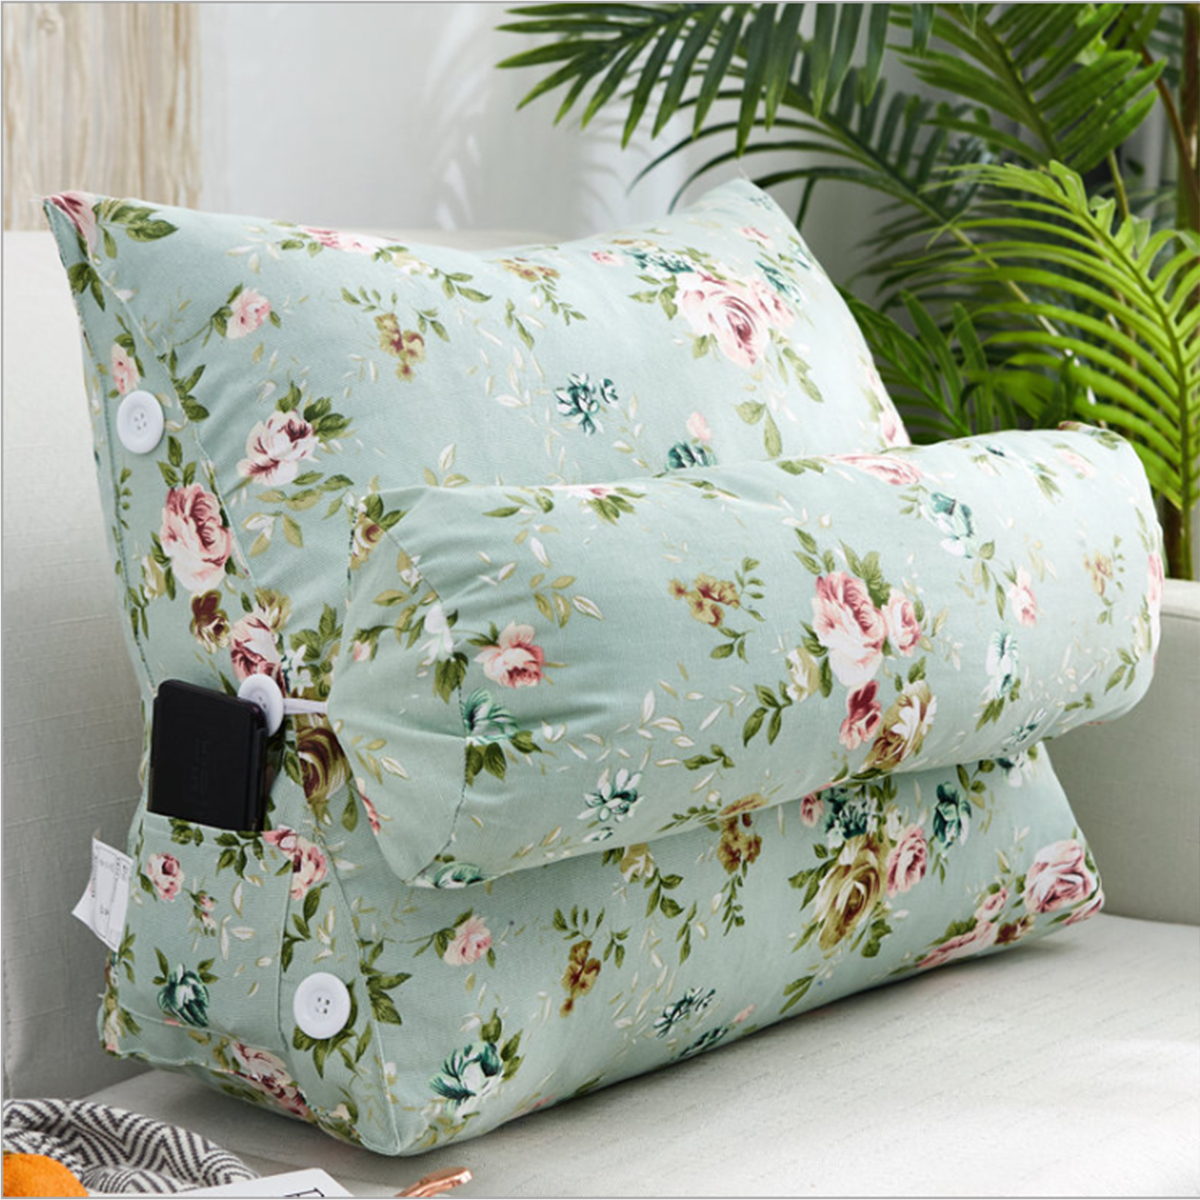 605022CM-Triangle-Cushion-Waist-Cushion-Rest-Pillow-Simple-Ins-Style-Removable-And-Washable-With-Hea-1695482-5